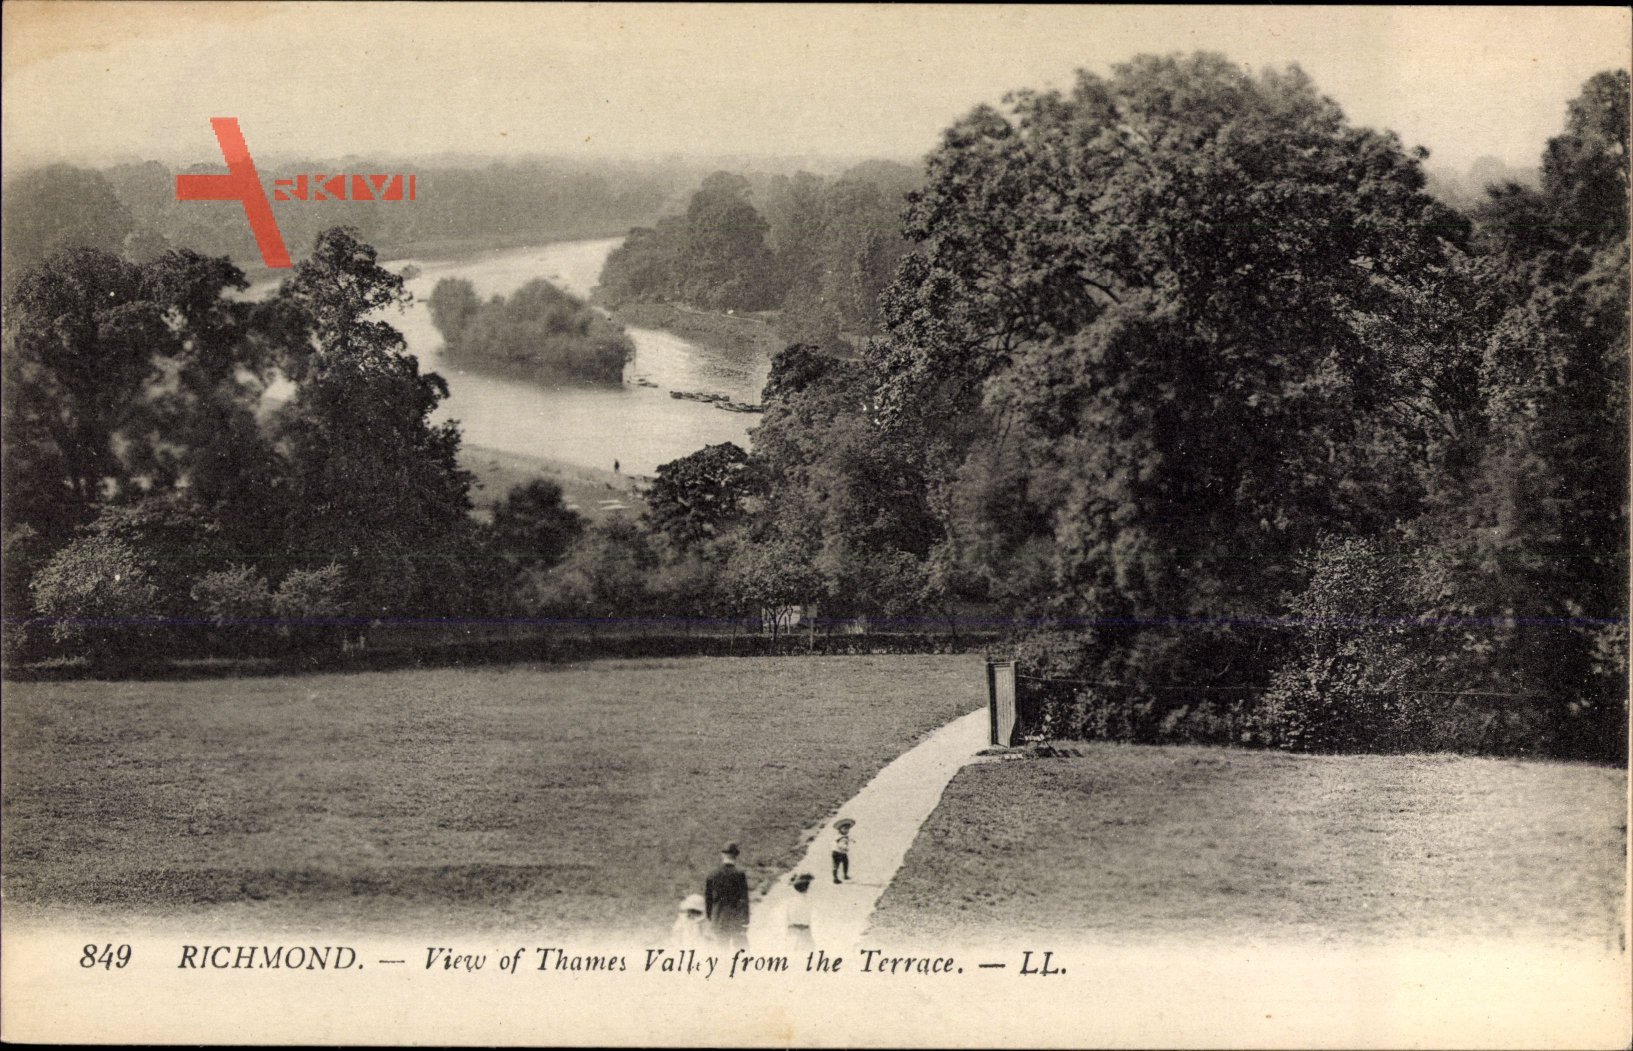 Richmond London, View of Thames Valley from the Terrace